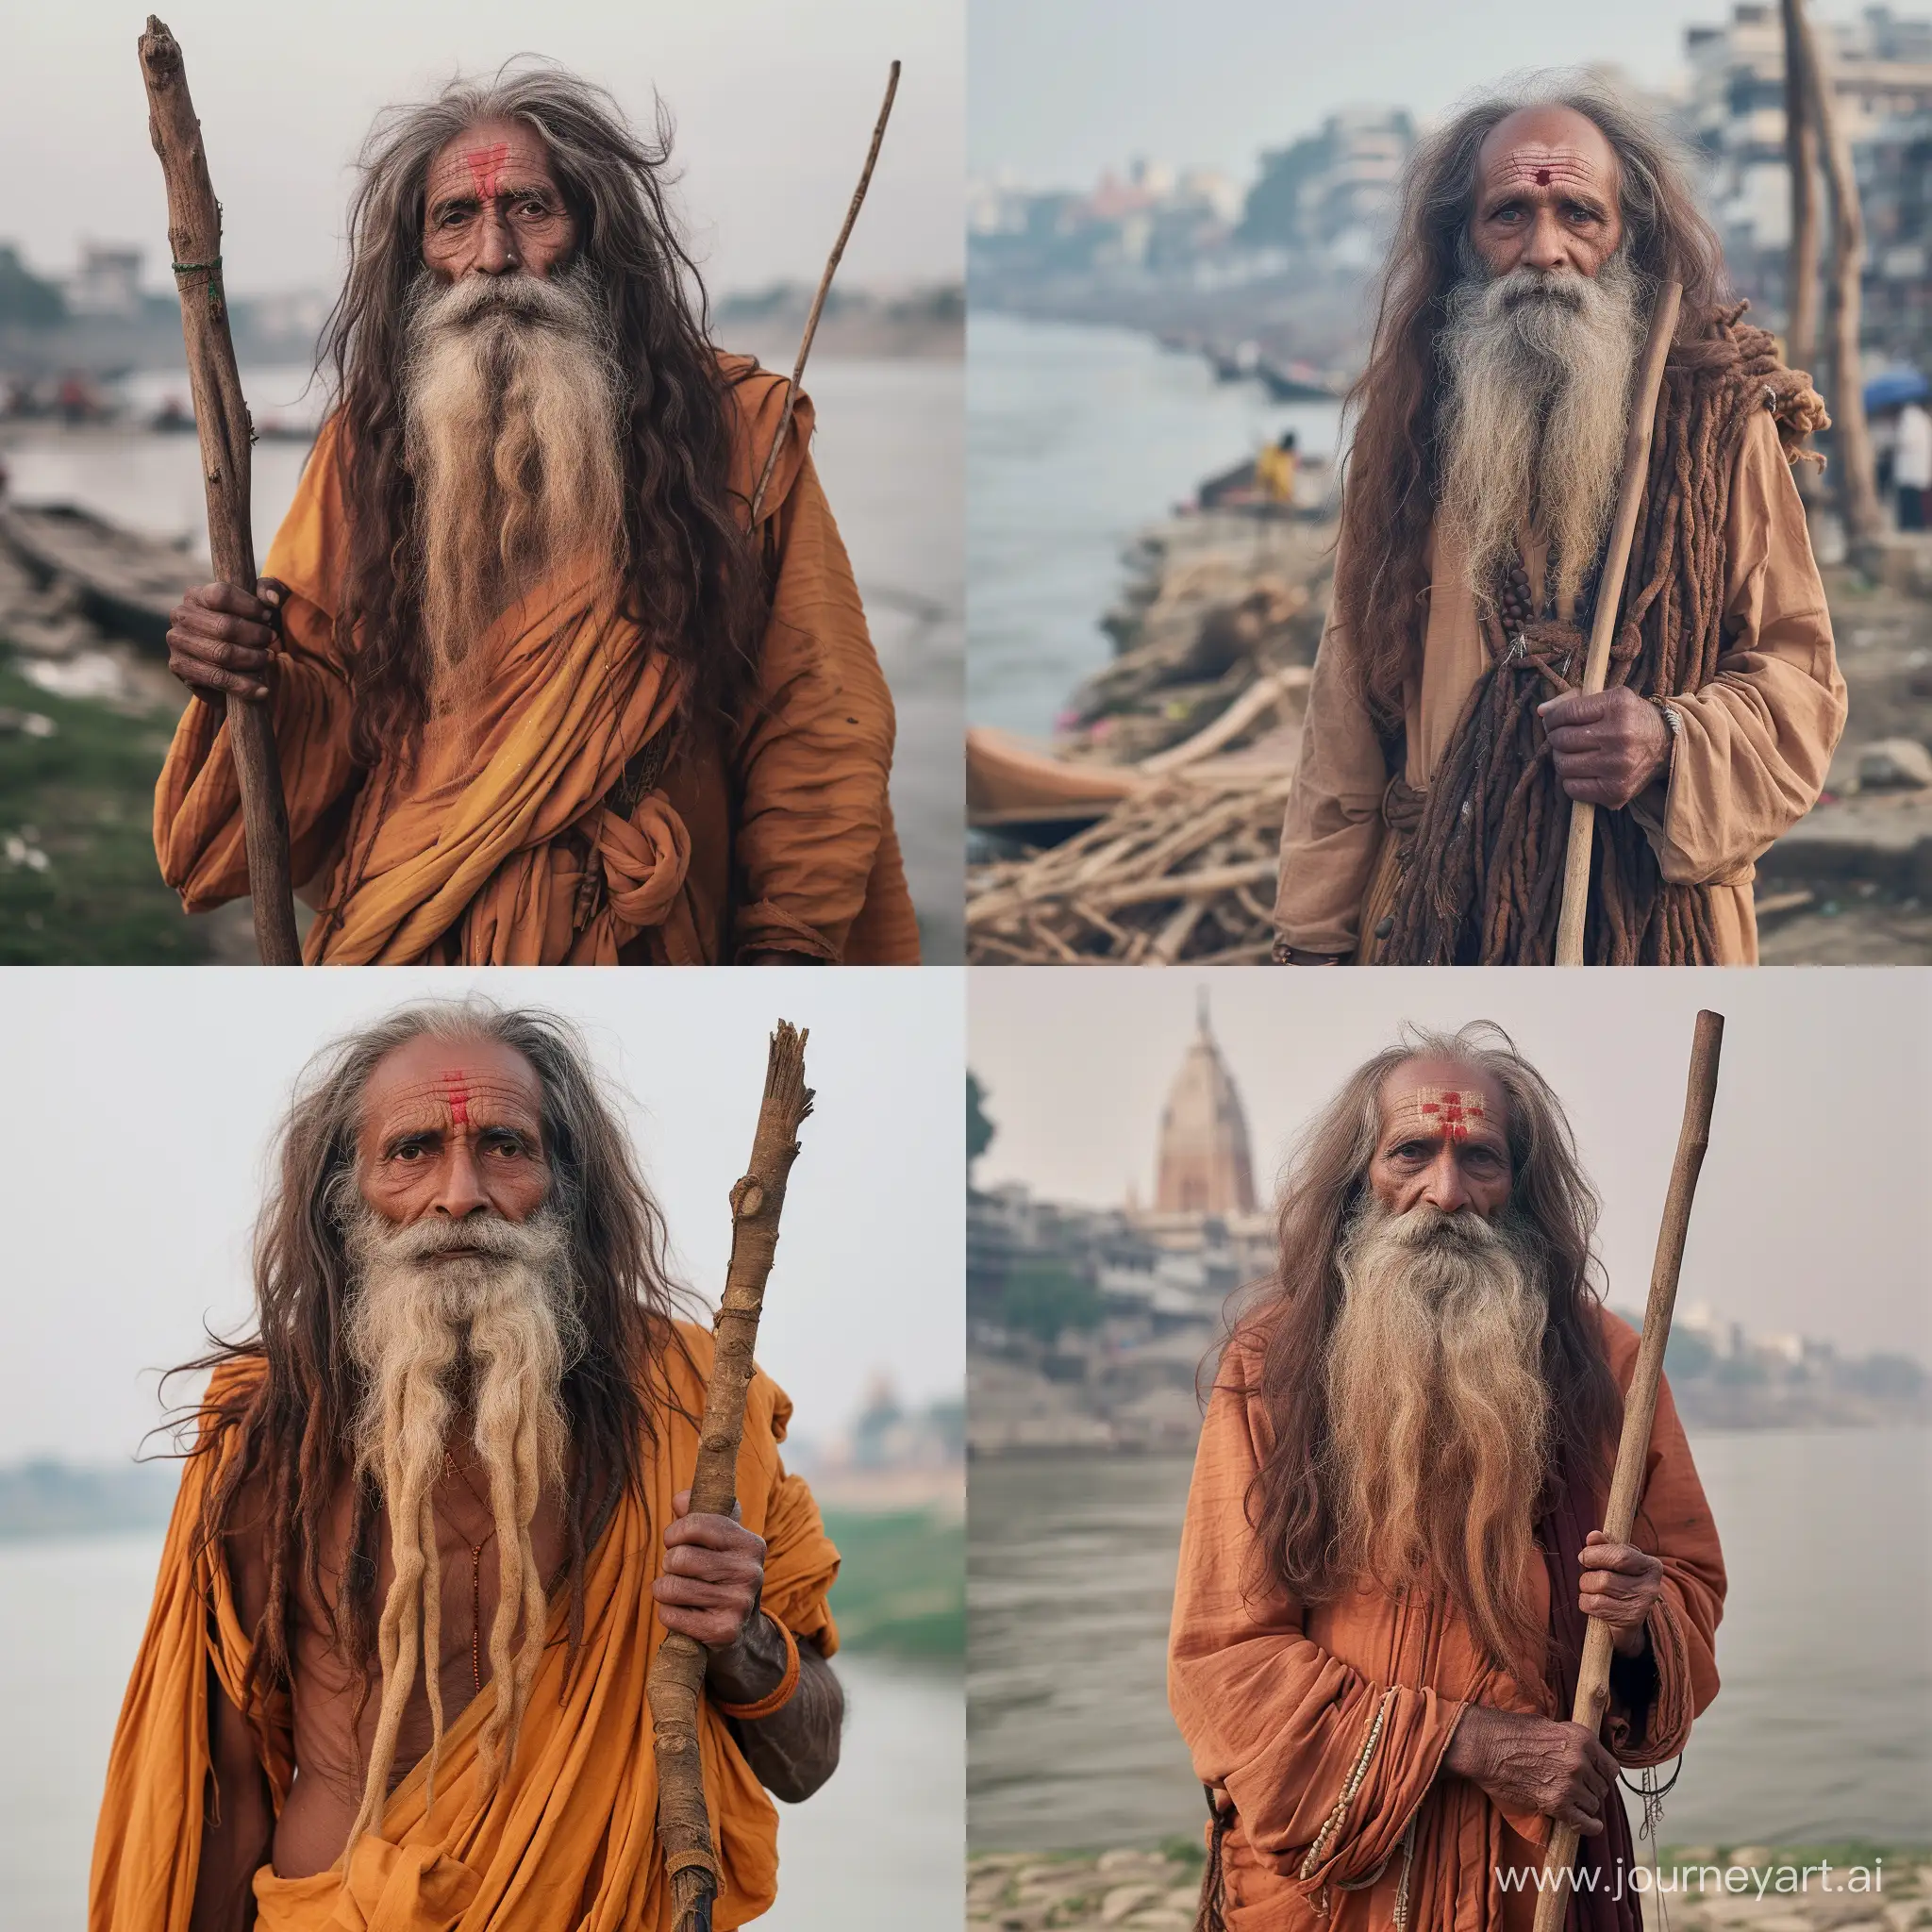 Elderly-Holy-Man-with-Long-Brown-Hair-by-the-Ganges-River-India